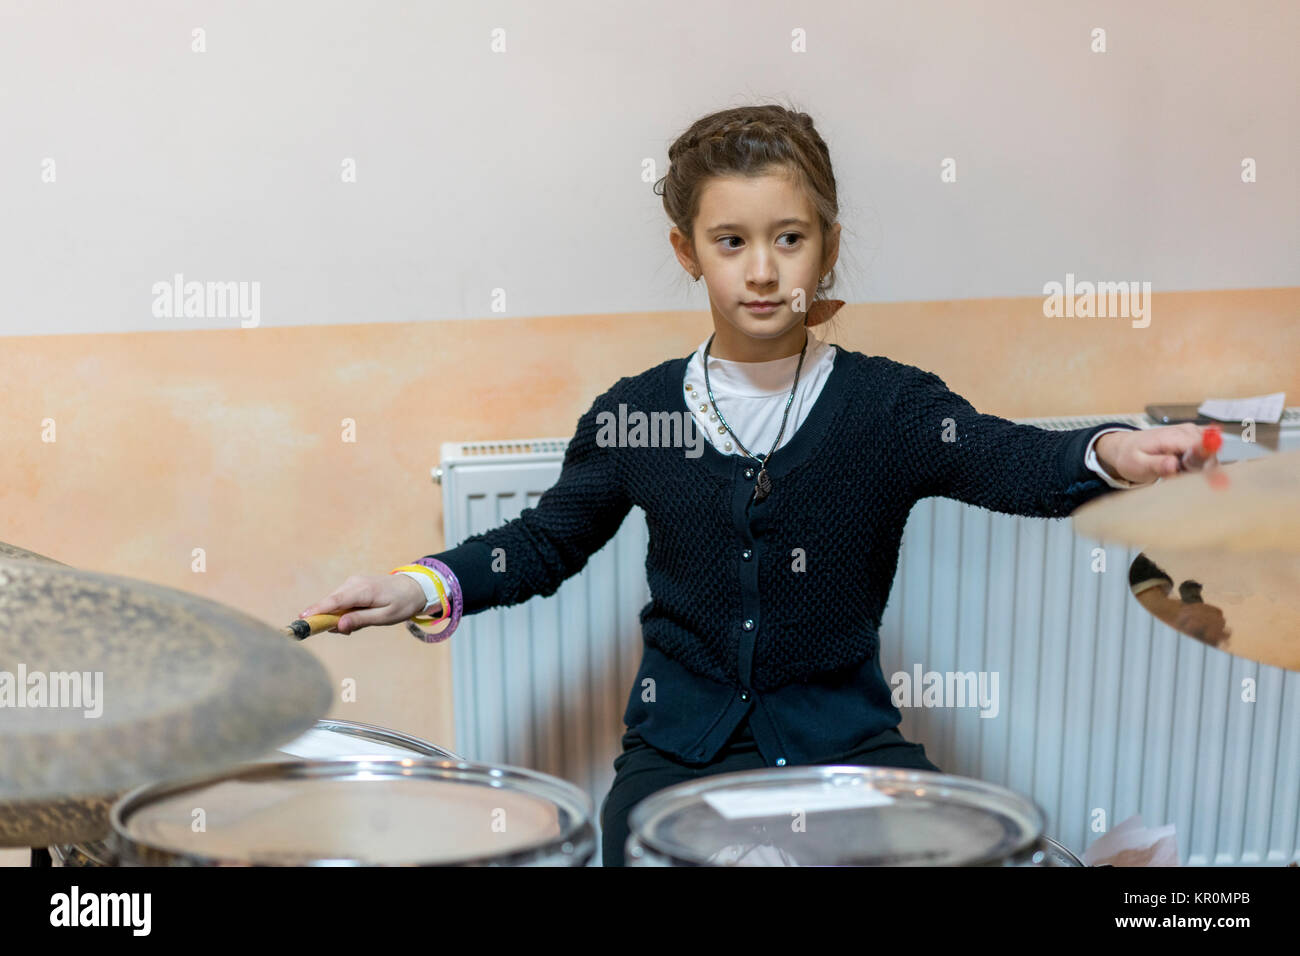 young caucasian teenage girl plays the drums Stock Photo